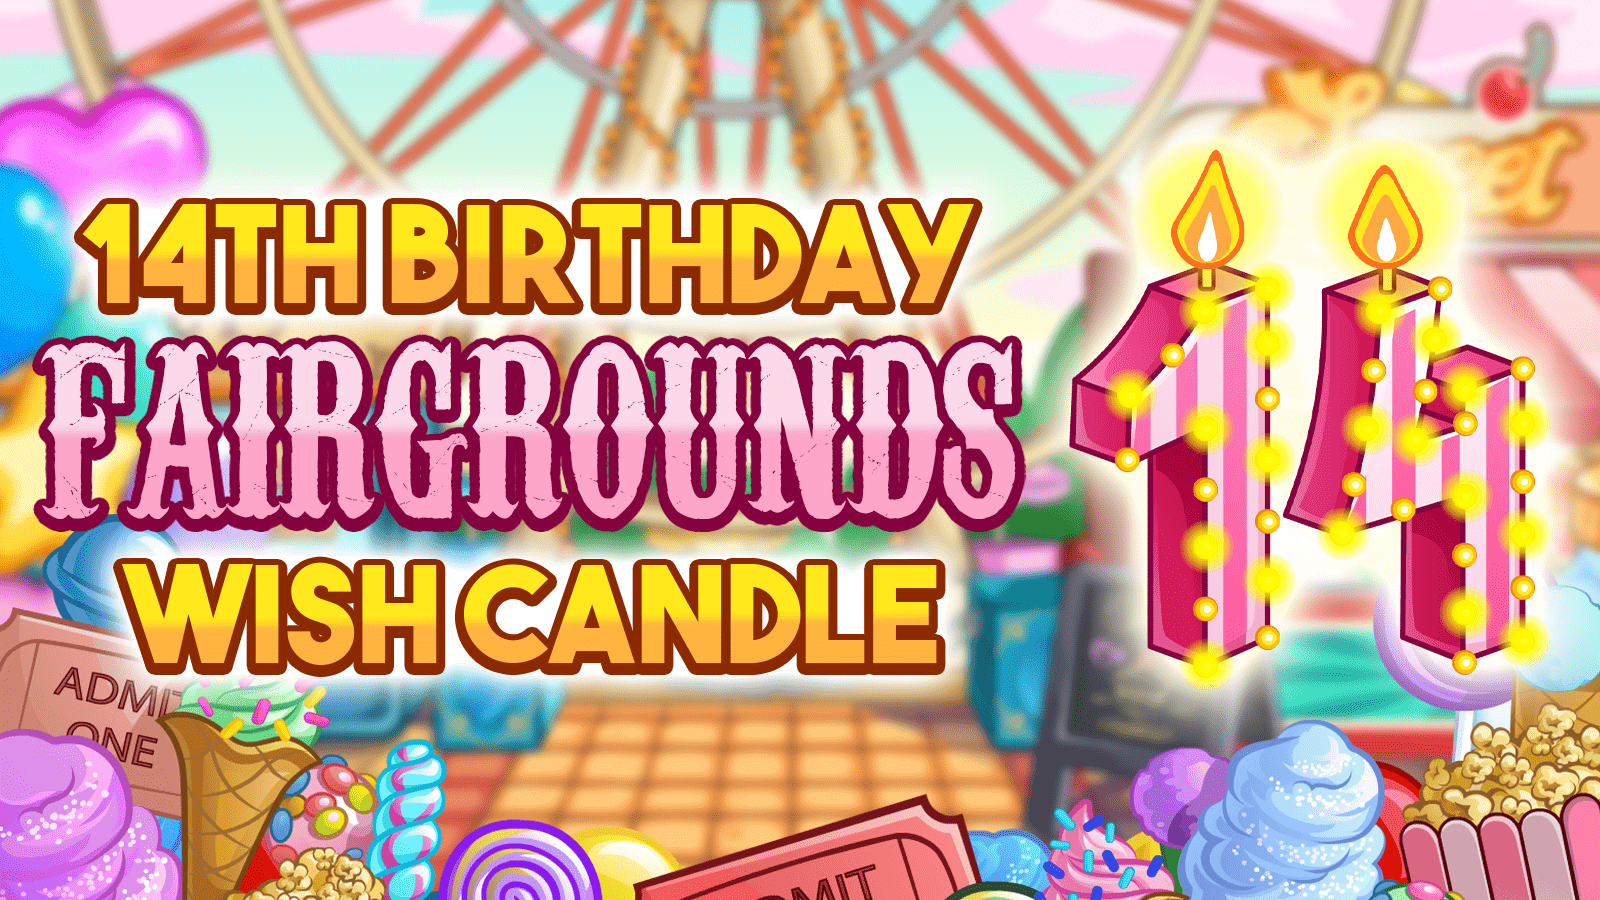 https://images.neopets.com/homepage/marquee/14thcandle_fairgrounds_lincb.png